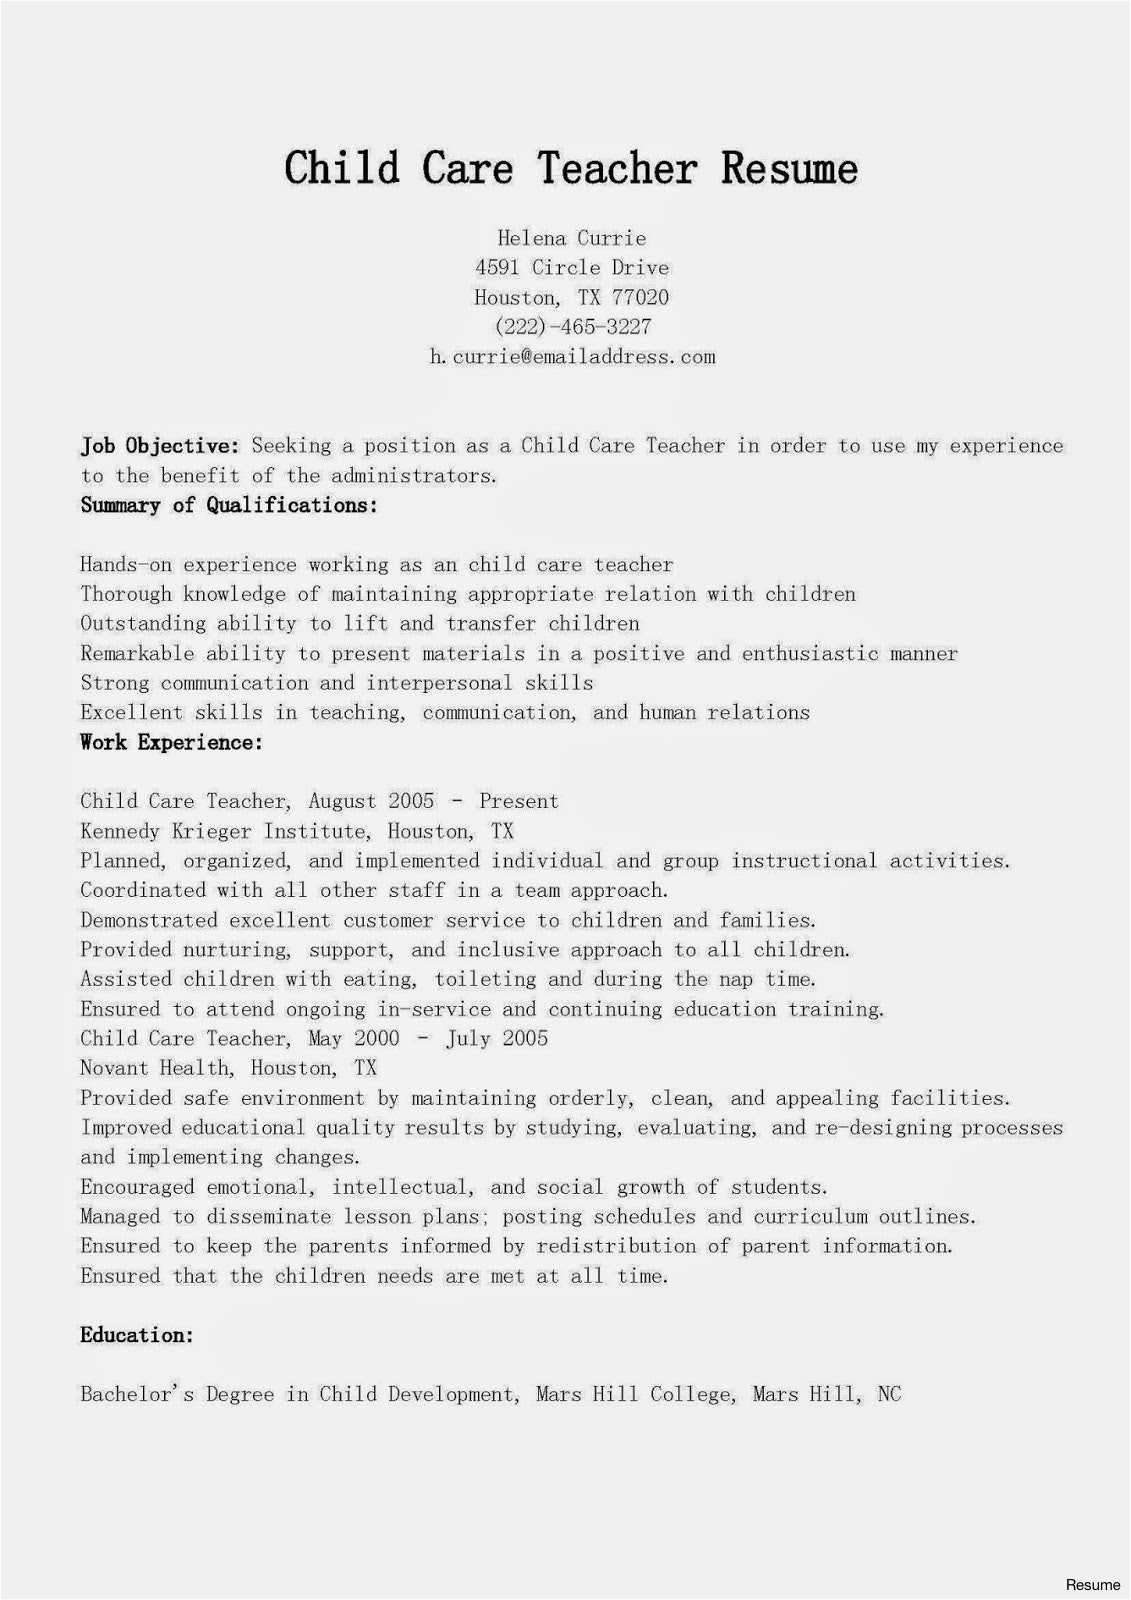 Sample Resume for Daycare Worker with No Experience 10 Resume for Child Care Jobs Proposal Resume